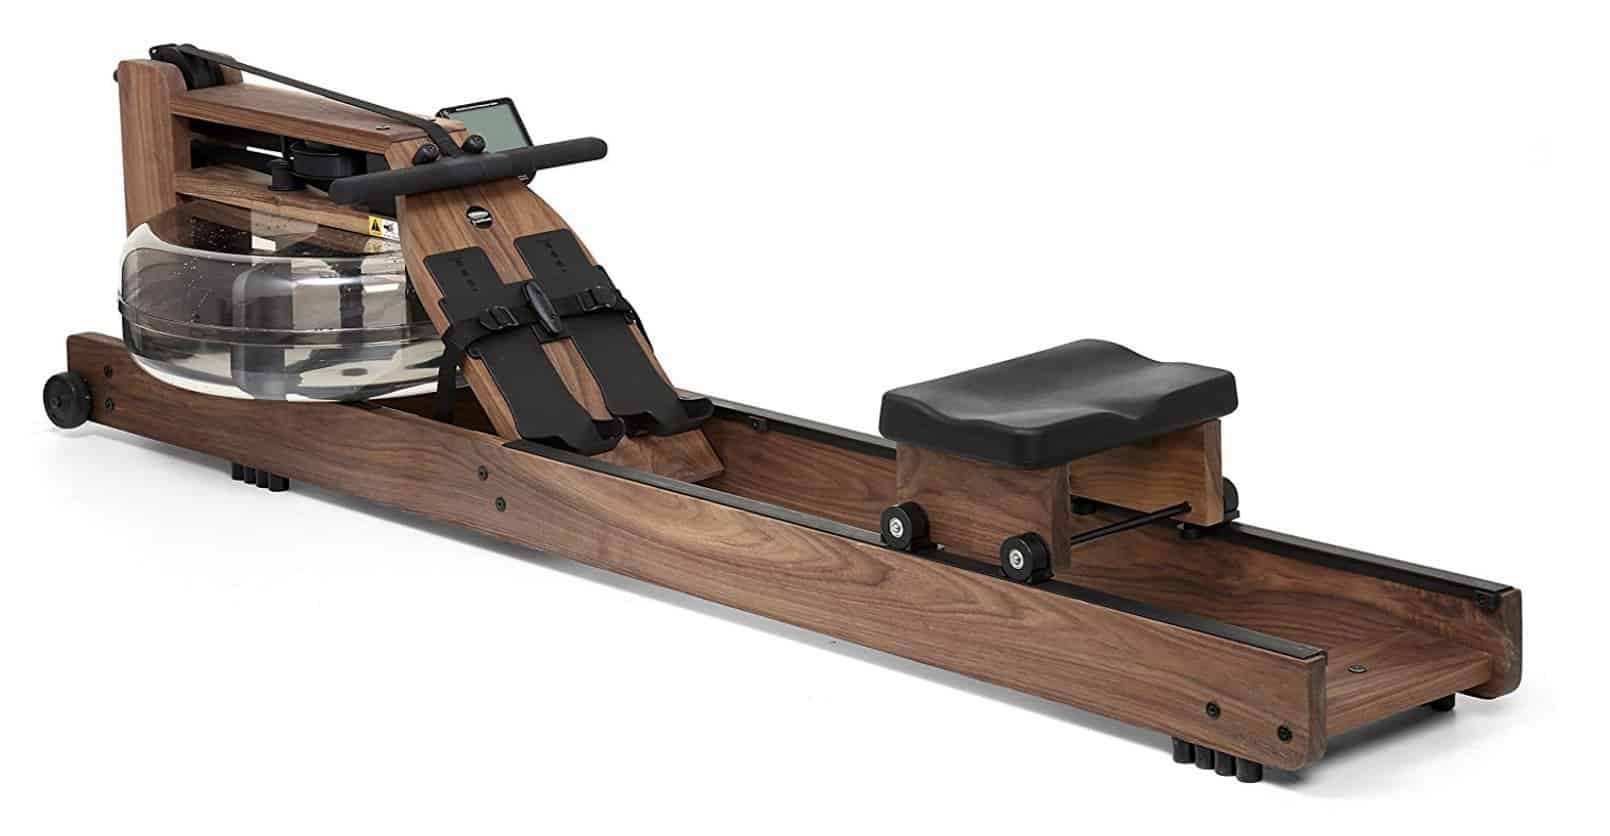 WaterRower Classic Rower Build Quality